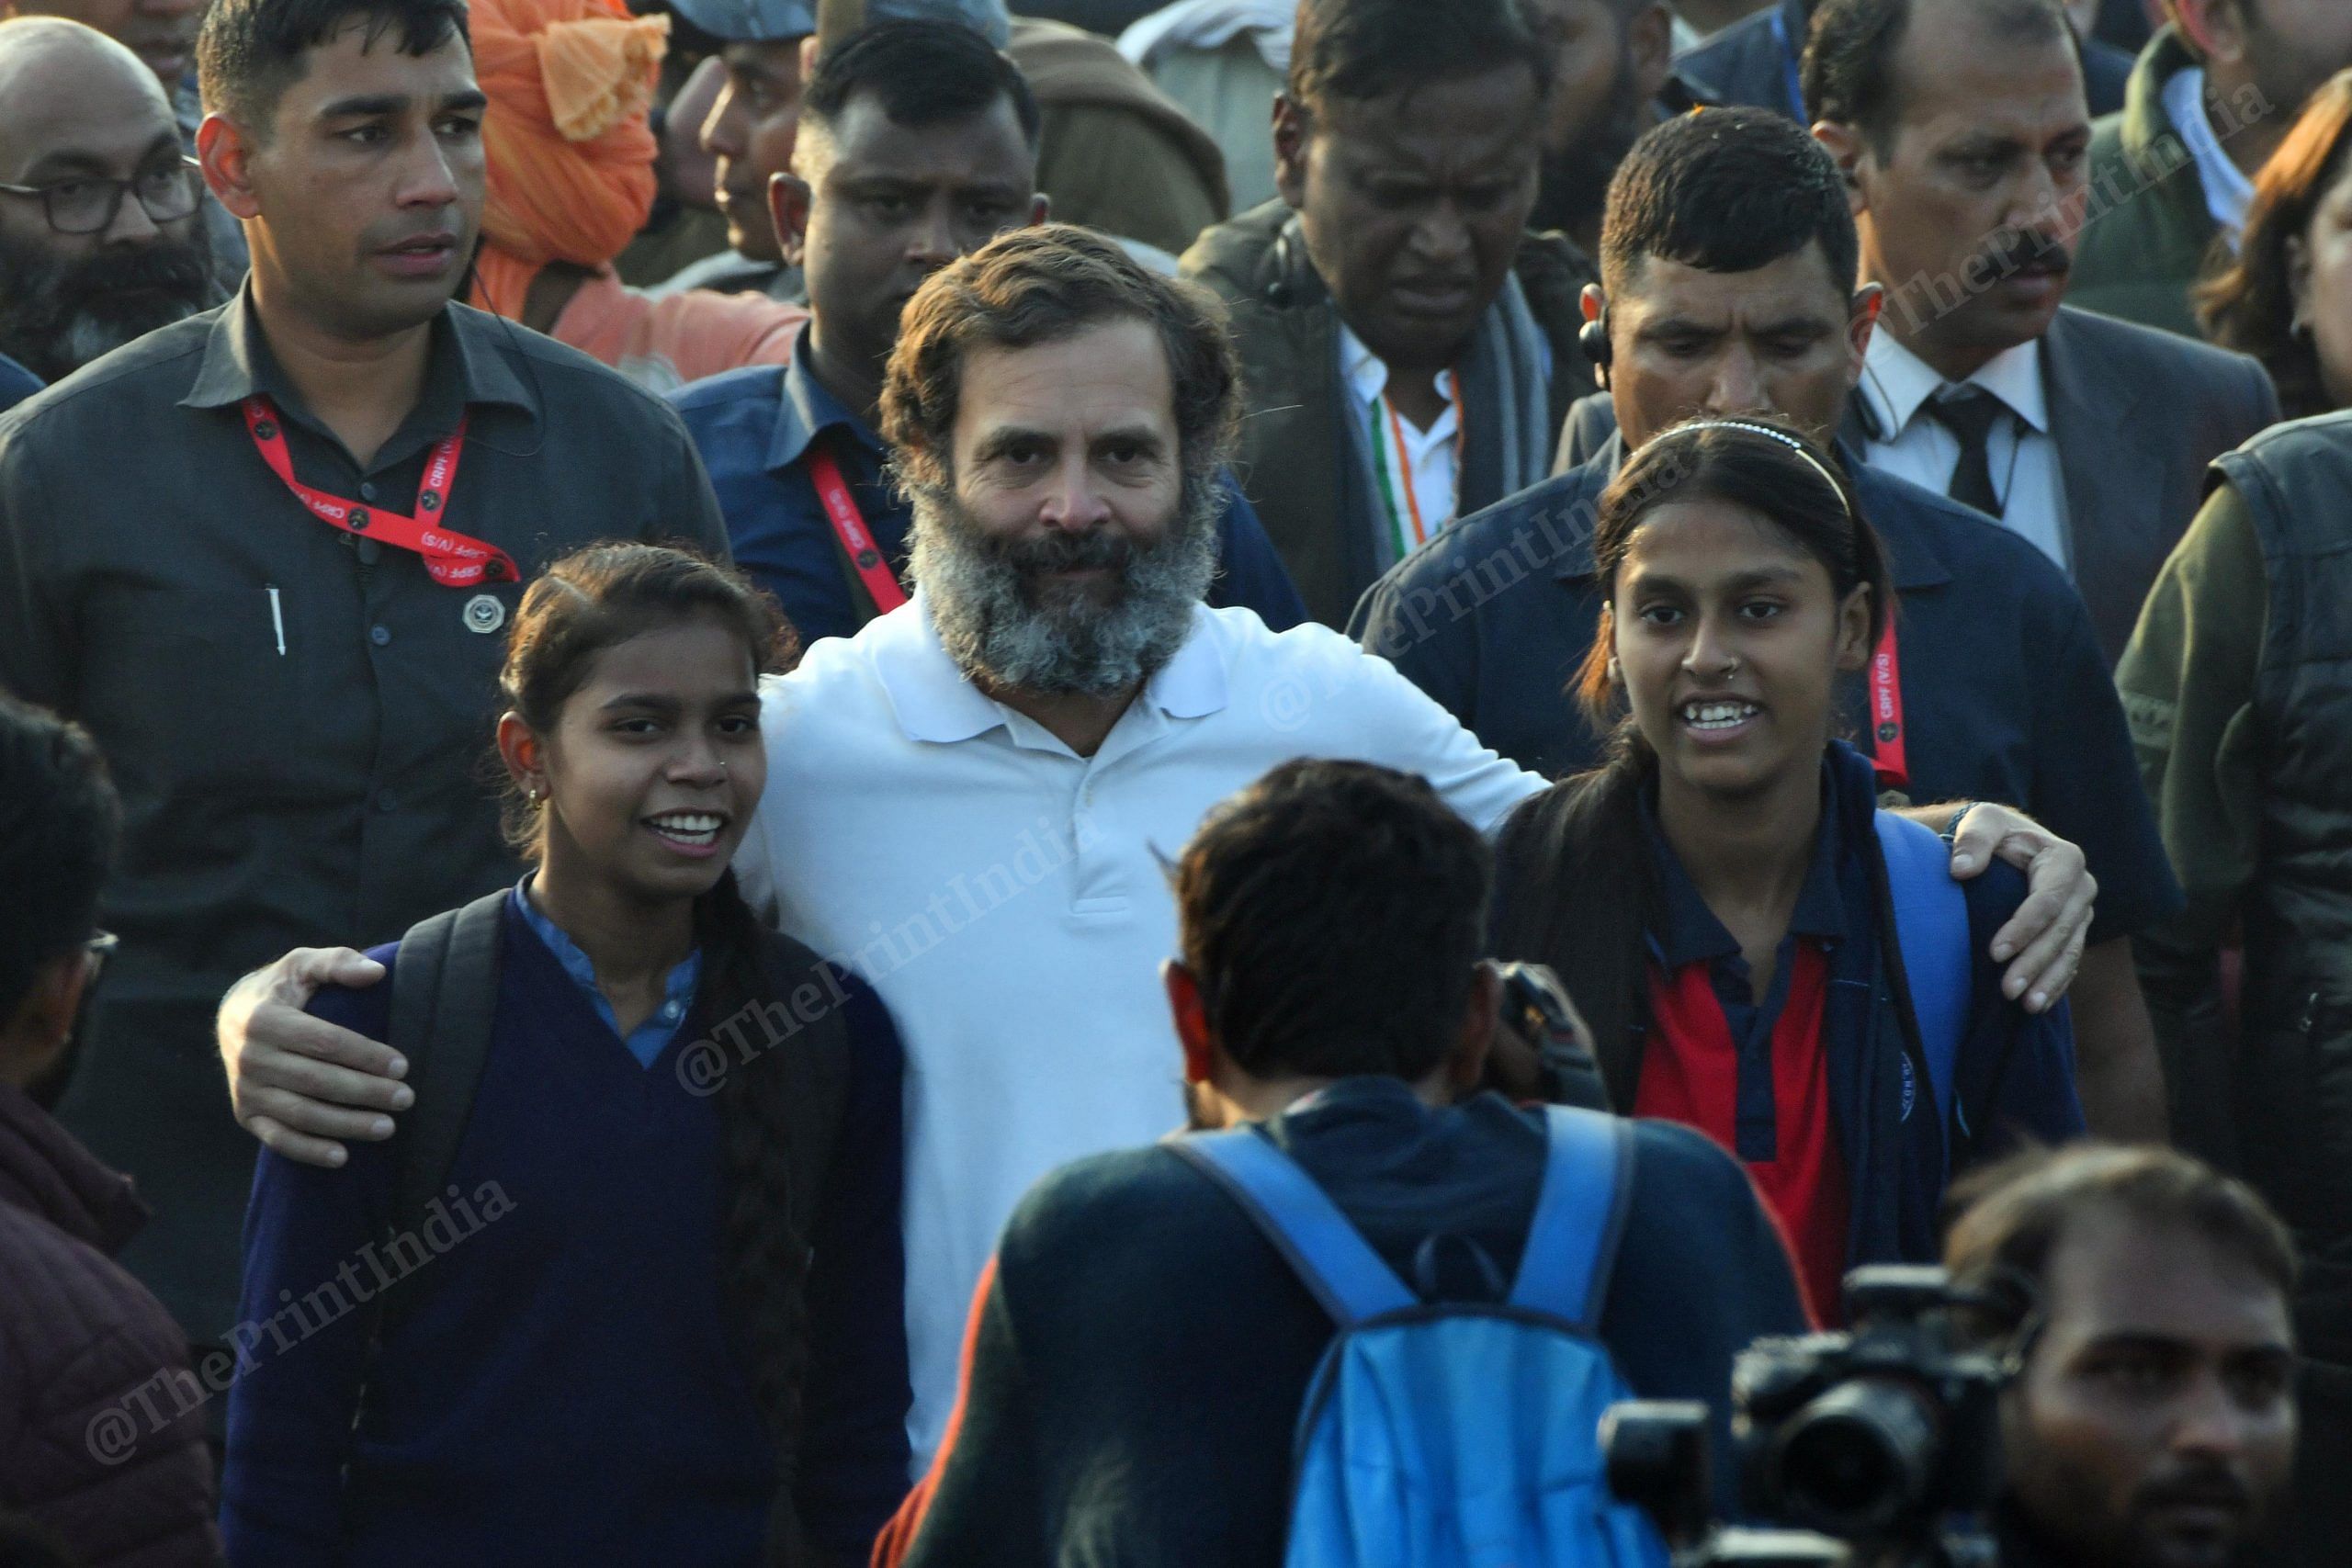 The Congress leader poses for photos with students | Photo: Suraj Singh Bisht | ThePrint